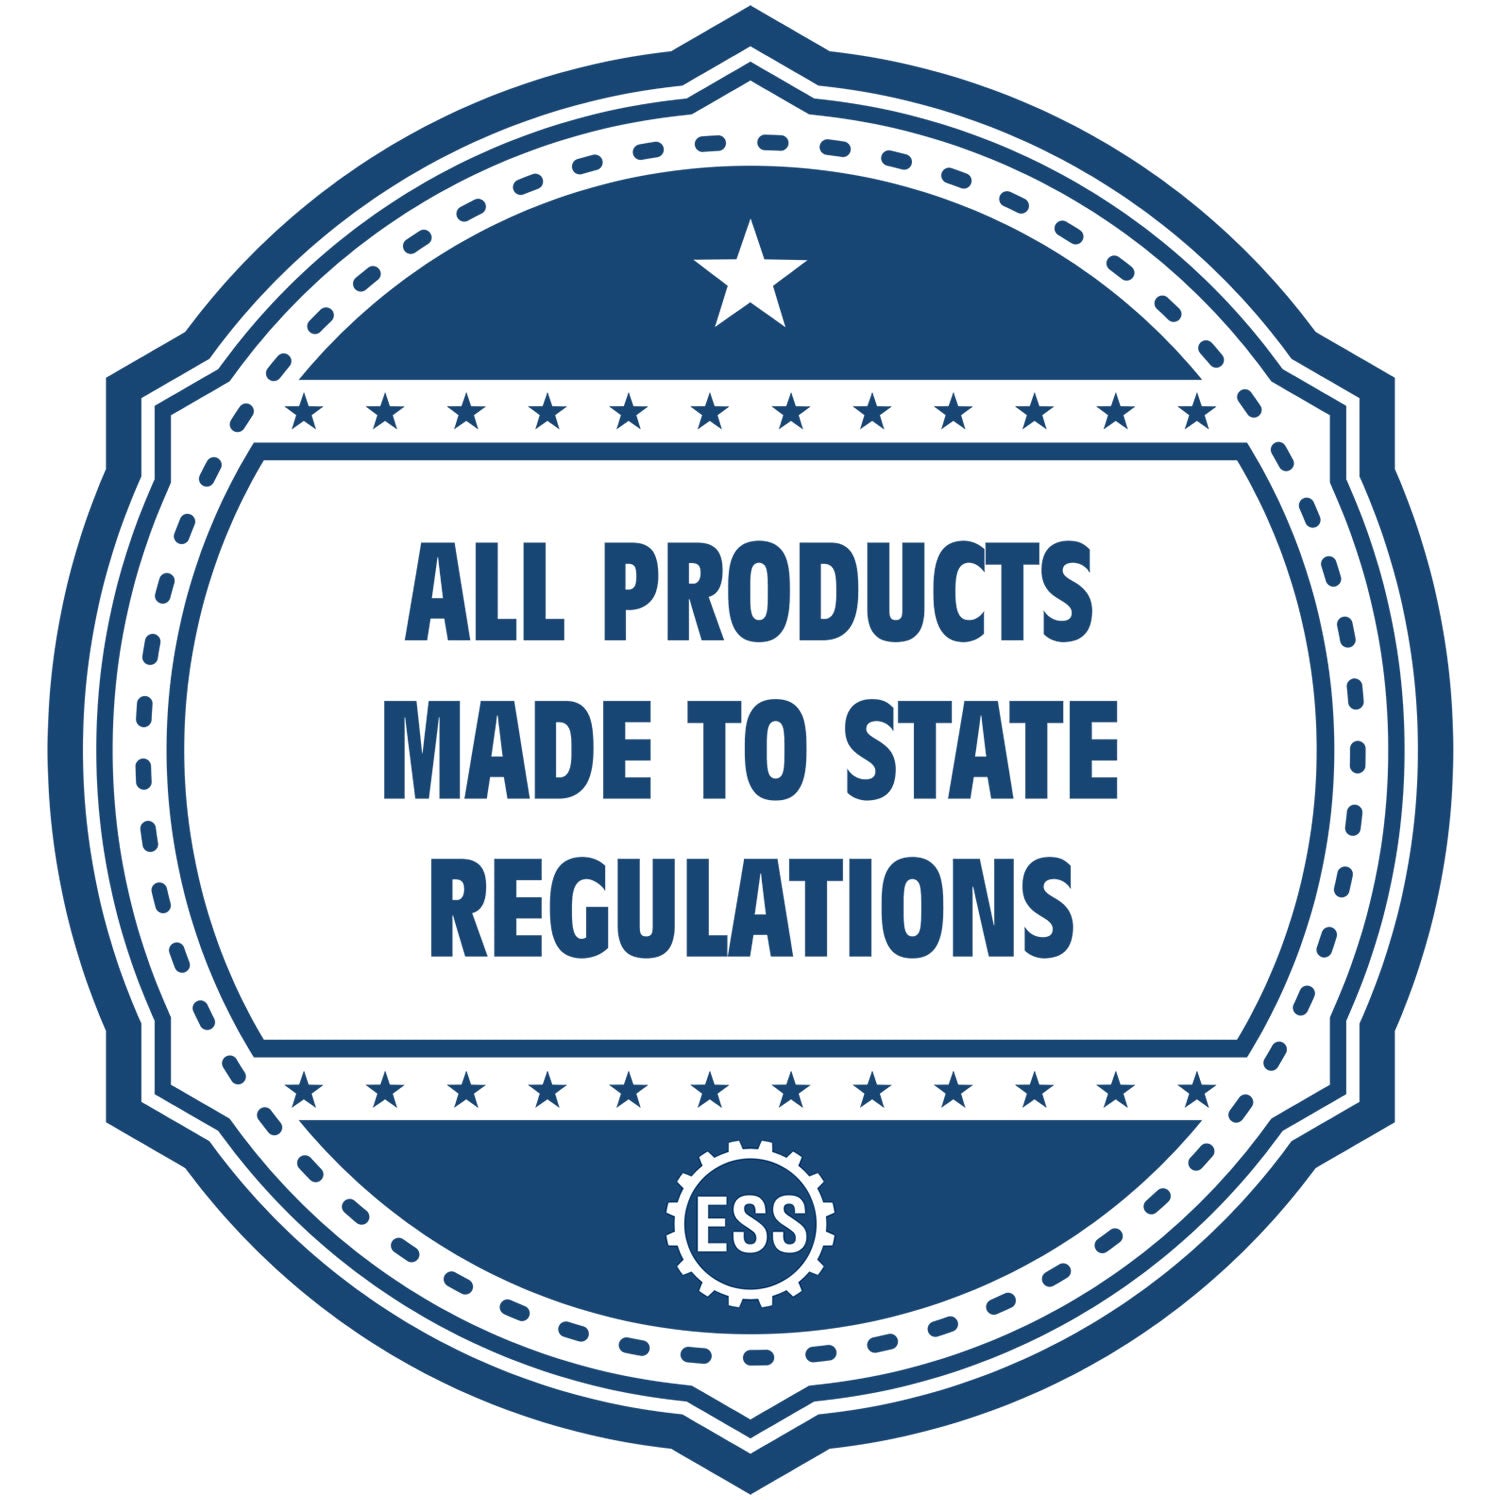 An icon or badge element for the Premium MaxLight Pre-Inked Connecticut Engineering Stamp showing that this product is made in compliance with state regulations.